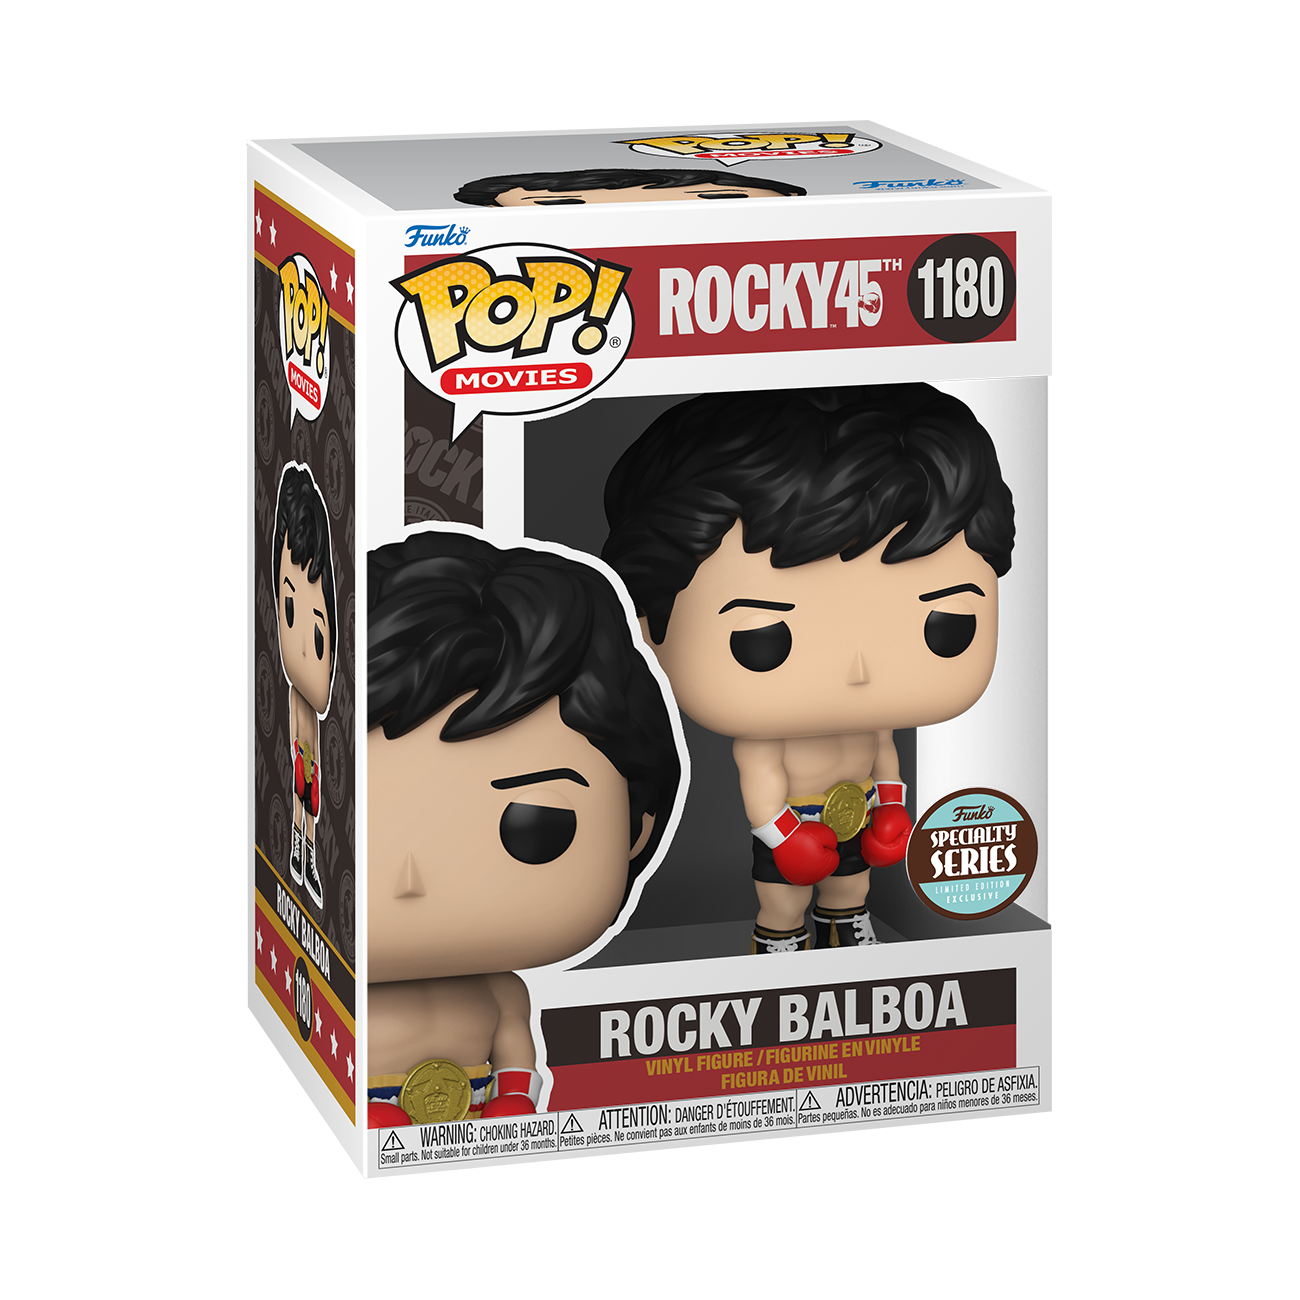  ROCKY BALBOA WITH BELT SPECIALTY SERIES EXC FUNKO POP MOVIES 45TH ANNIVERSARY #1180</p><BR>In Stock<BR>In Stock Safety Information<br>Warning: Not suitable for children under 3 years. Small Parts. 